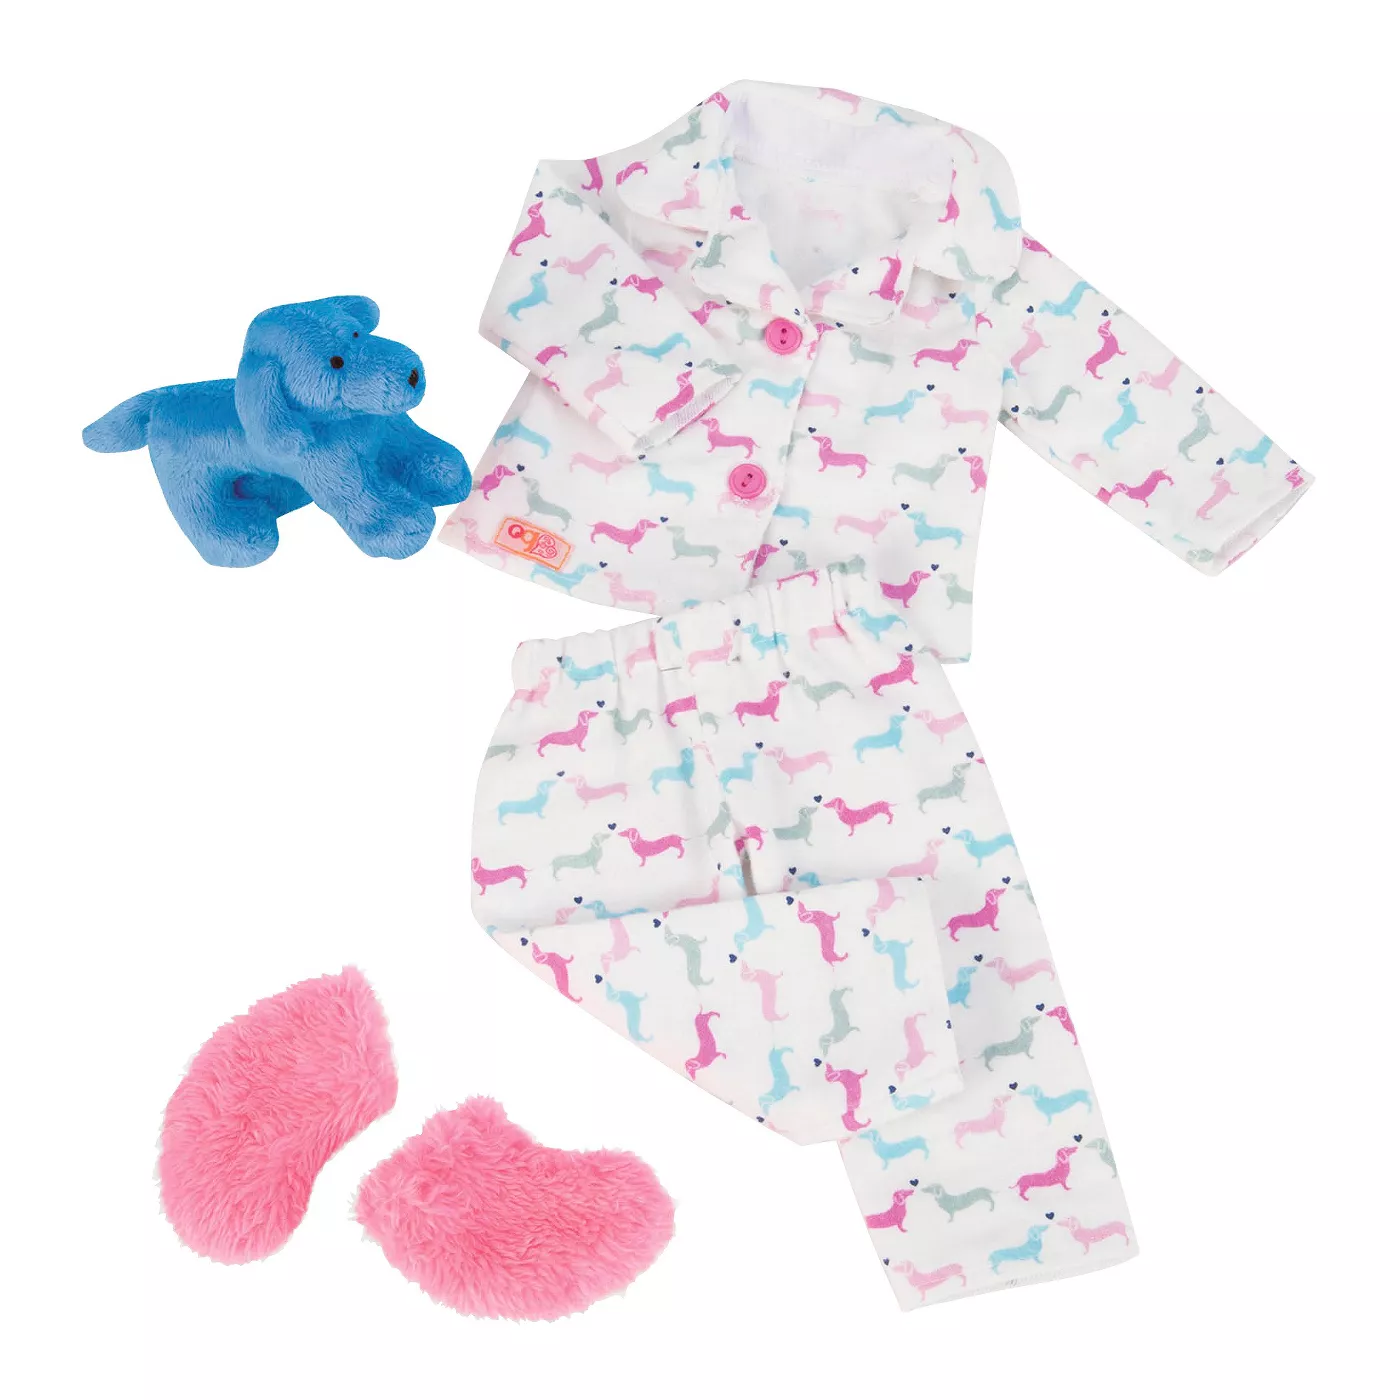 Our Generation Pajama Outfit for 18" Dolls - Counting Puppies - image 1 of 3